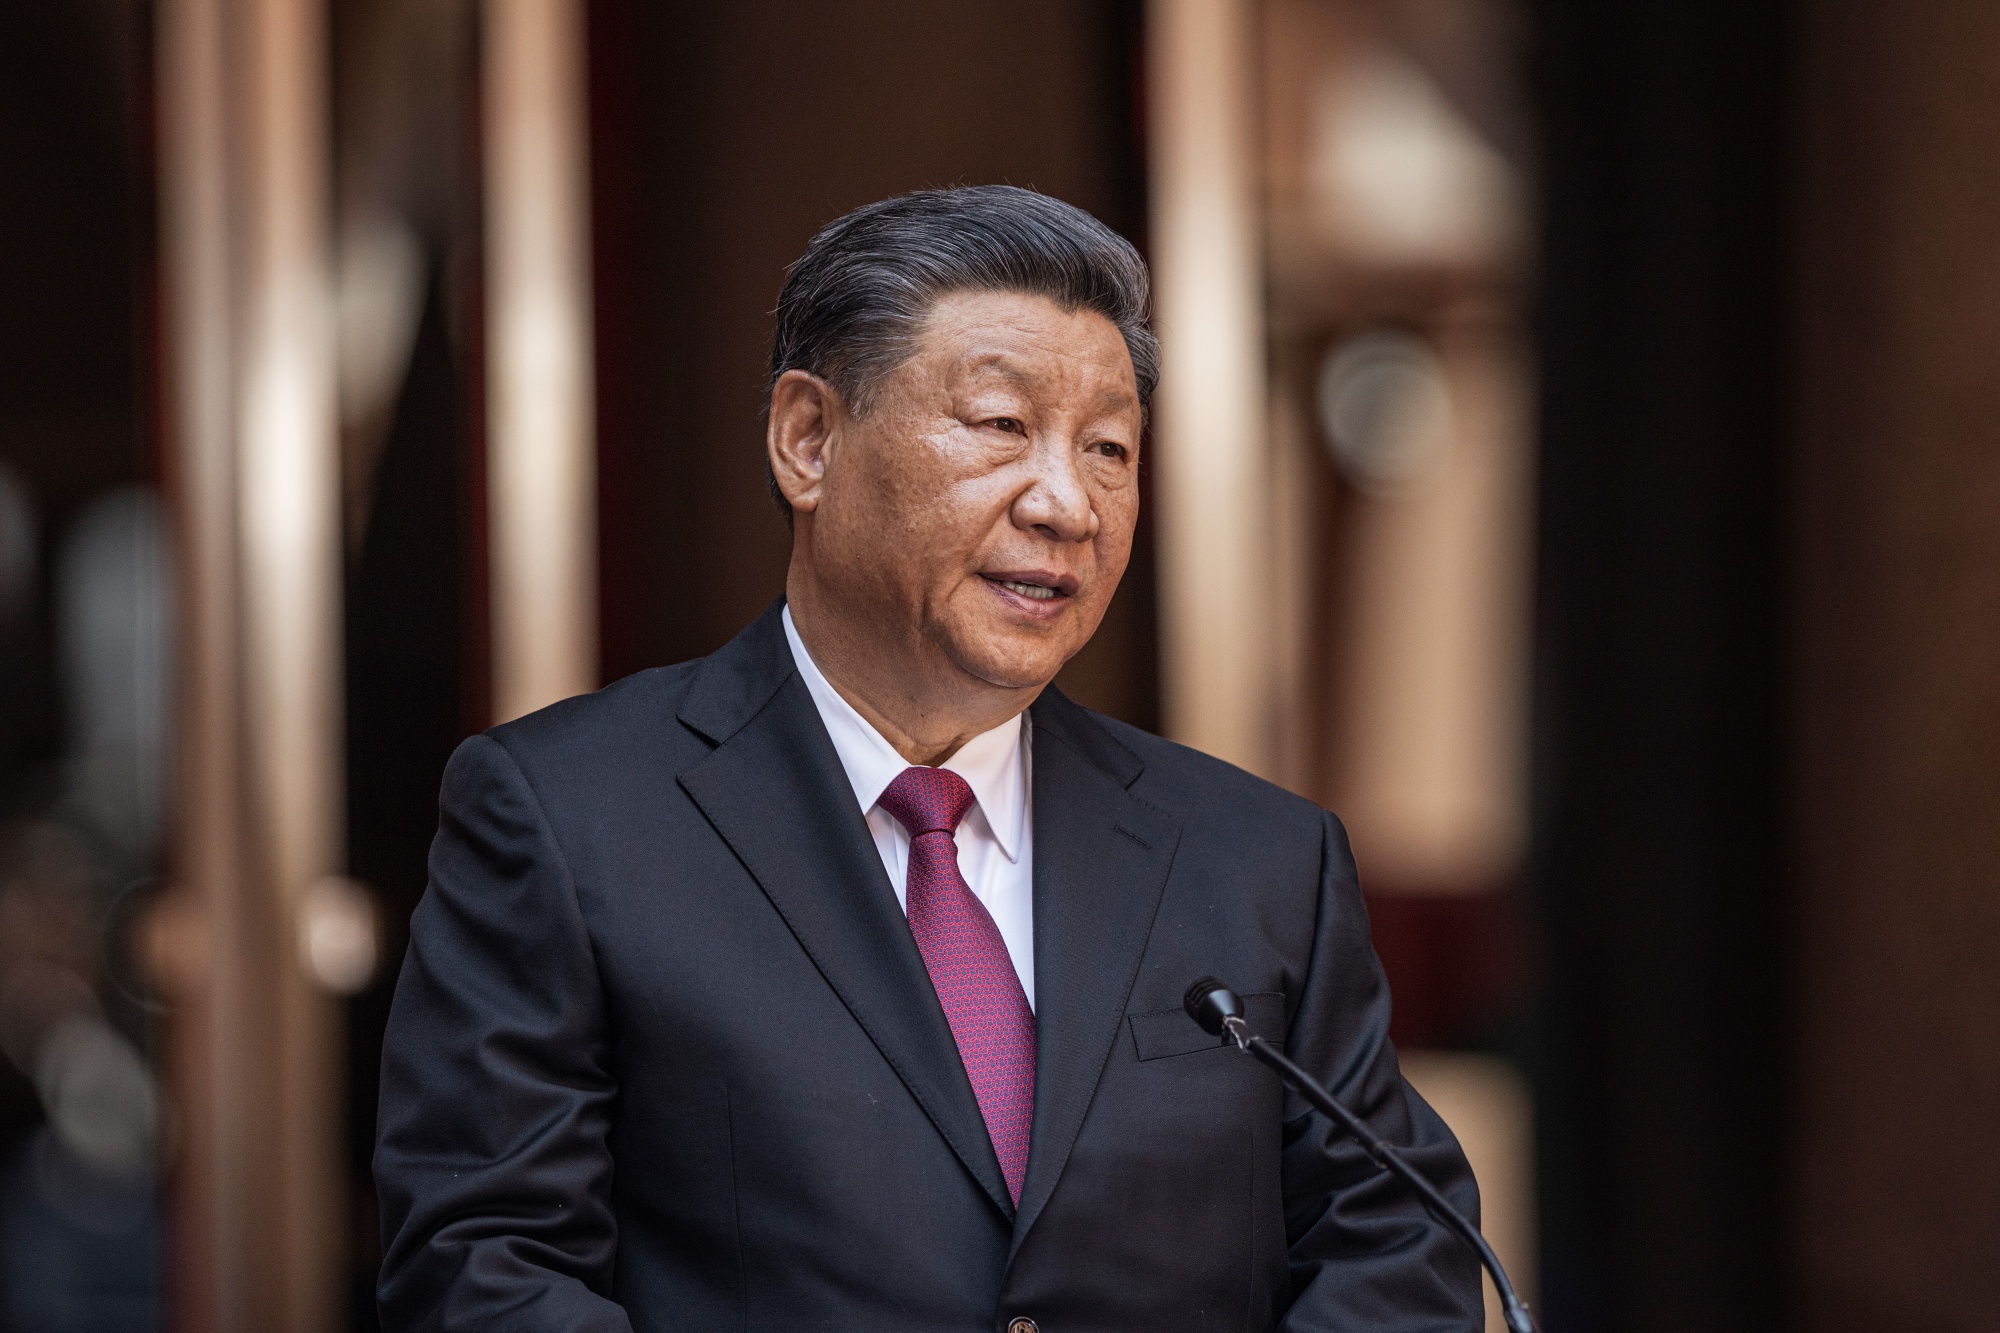 Another billionaire business leader is set to visit China